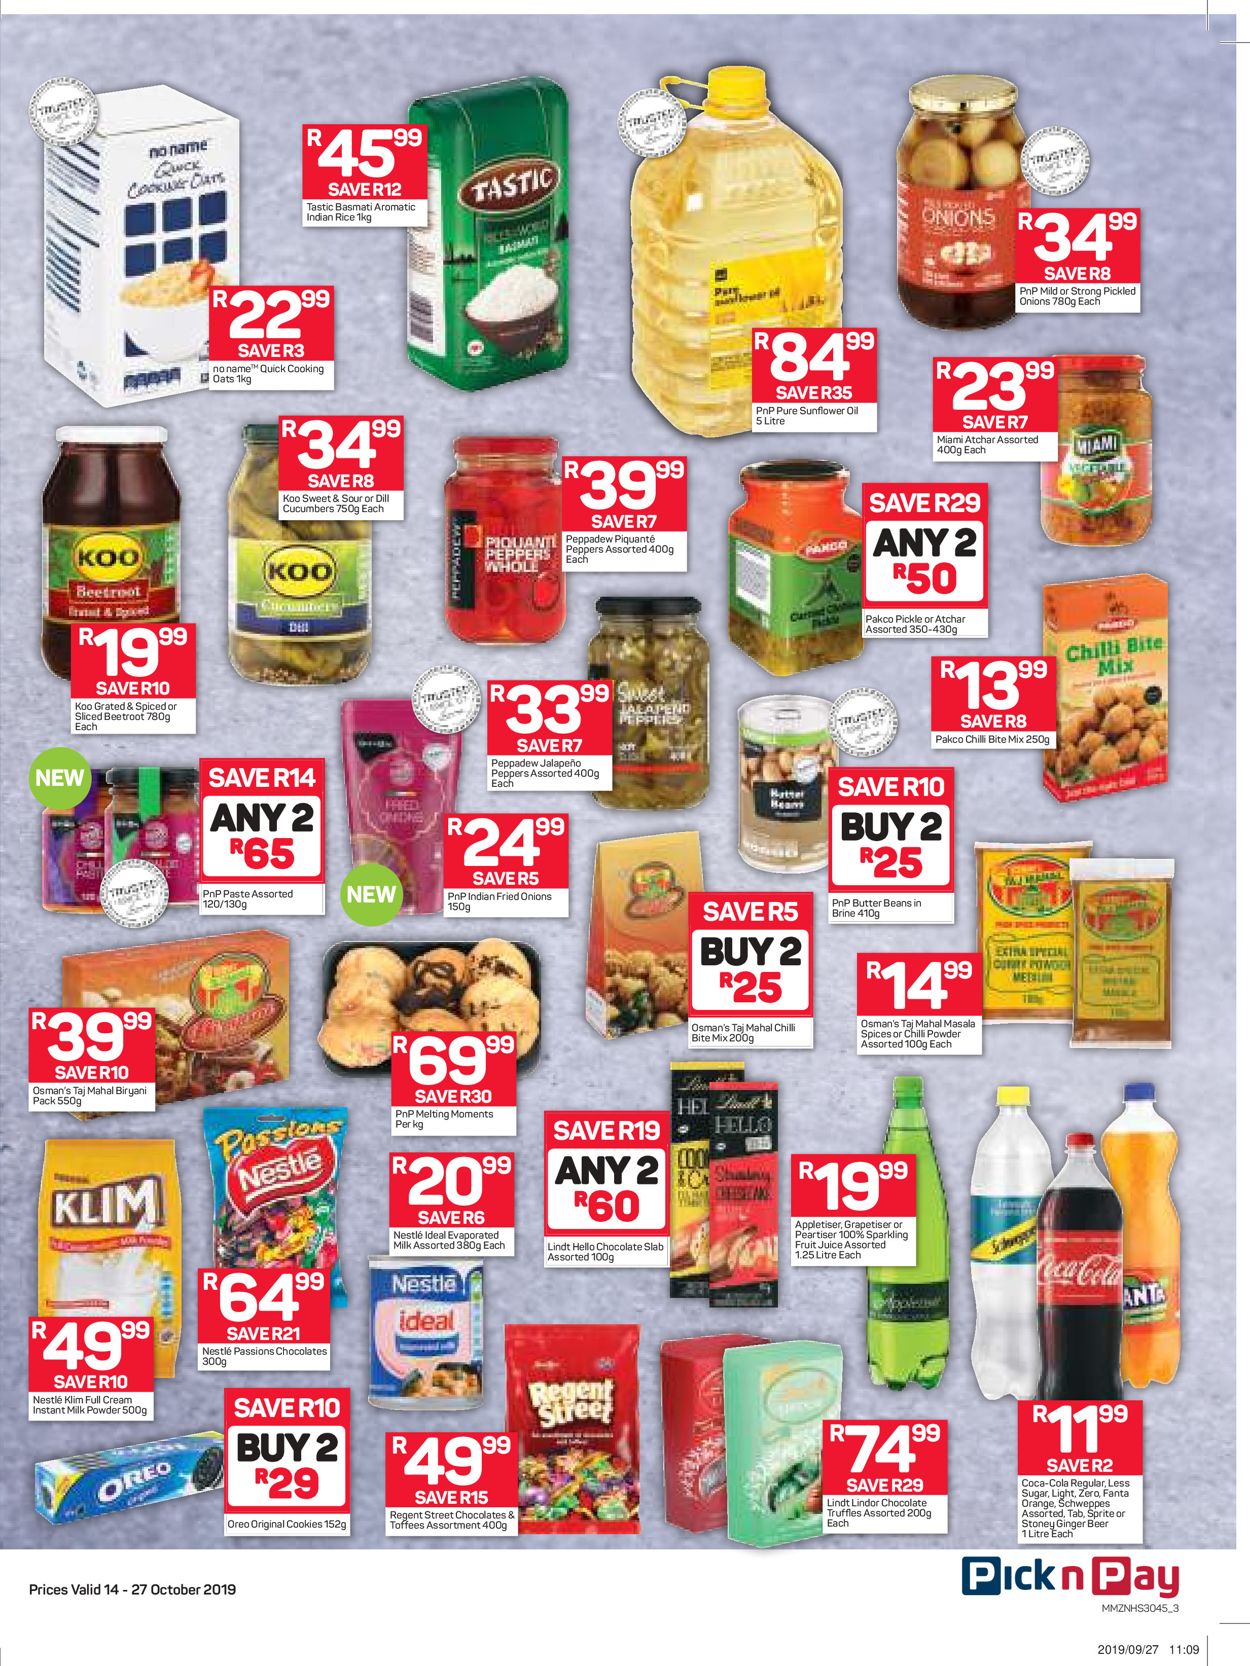 Pick n Pay Catalogue - 2019/10/14-2019/10/27 (Page 4)